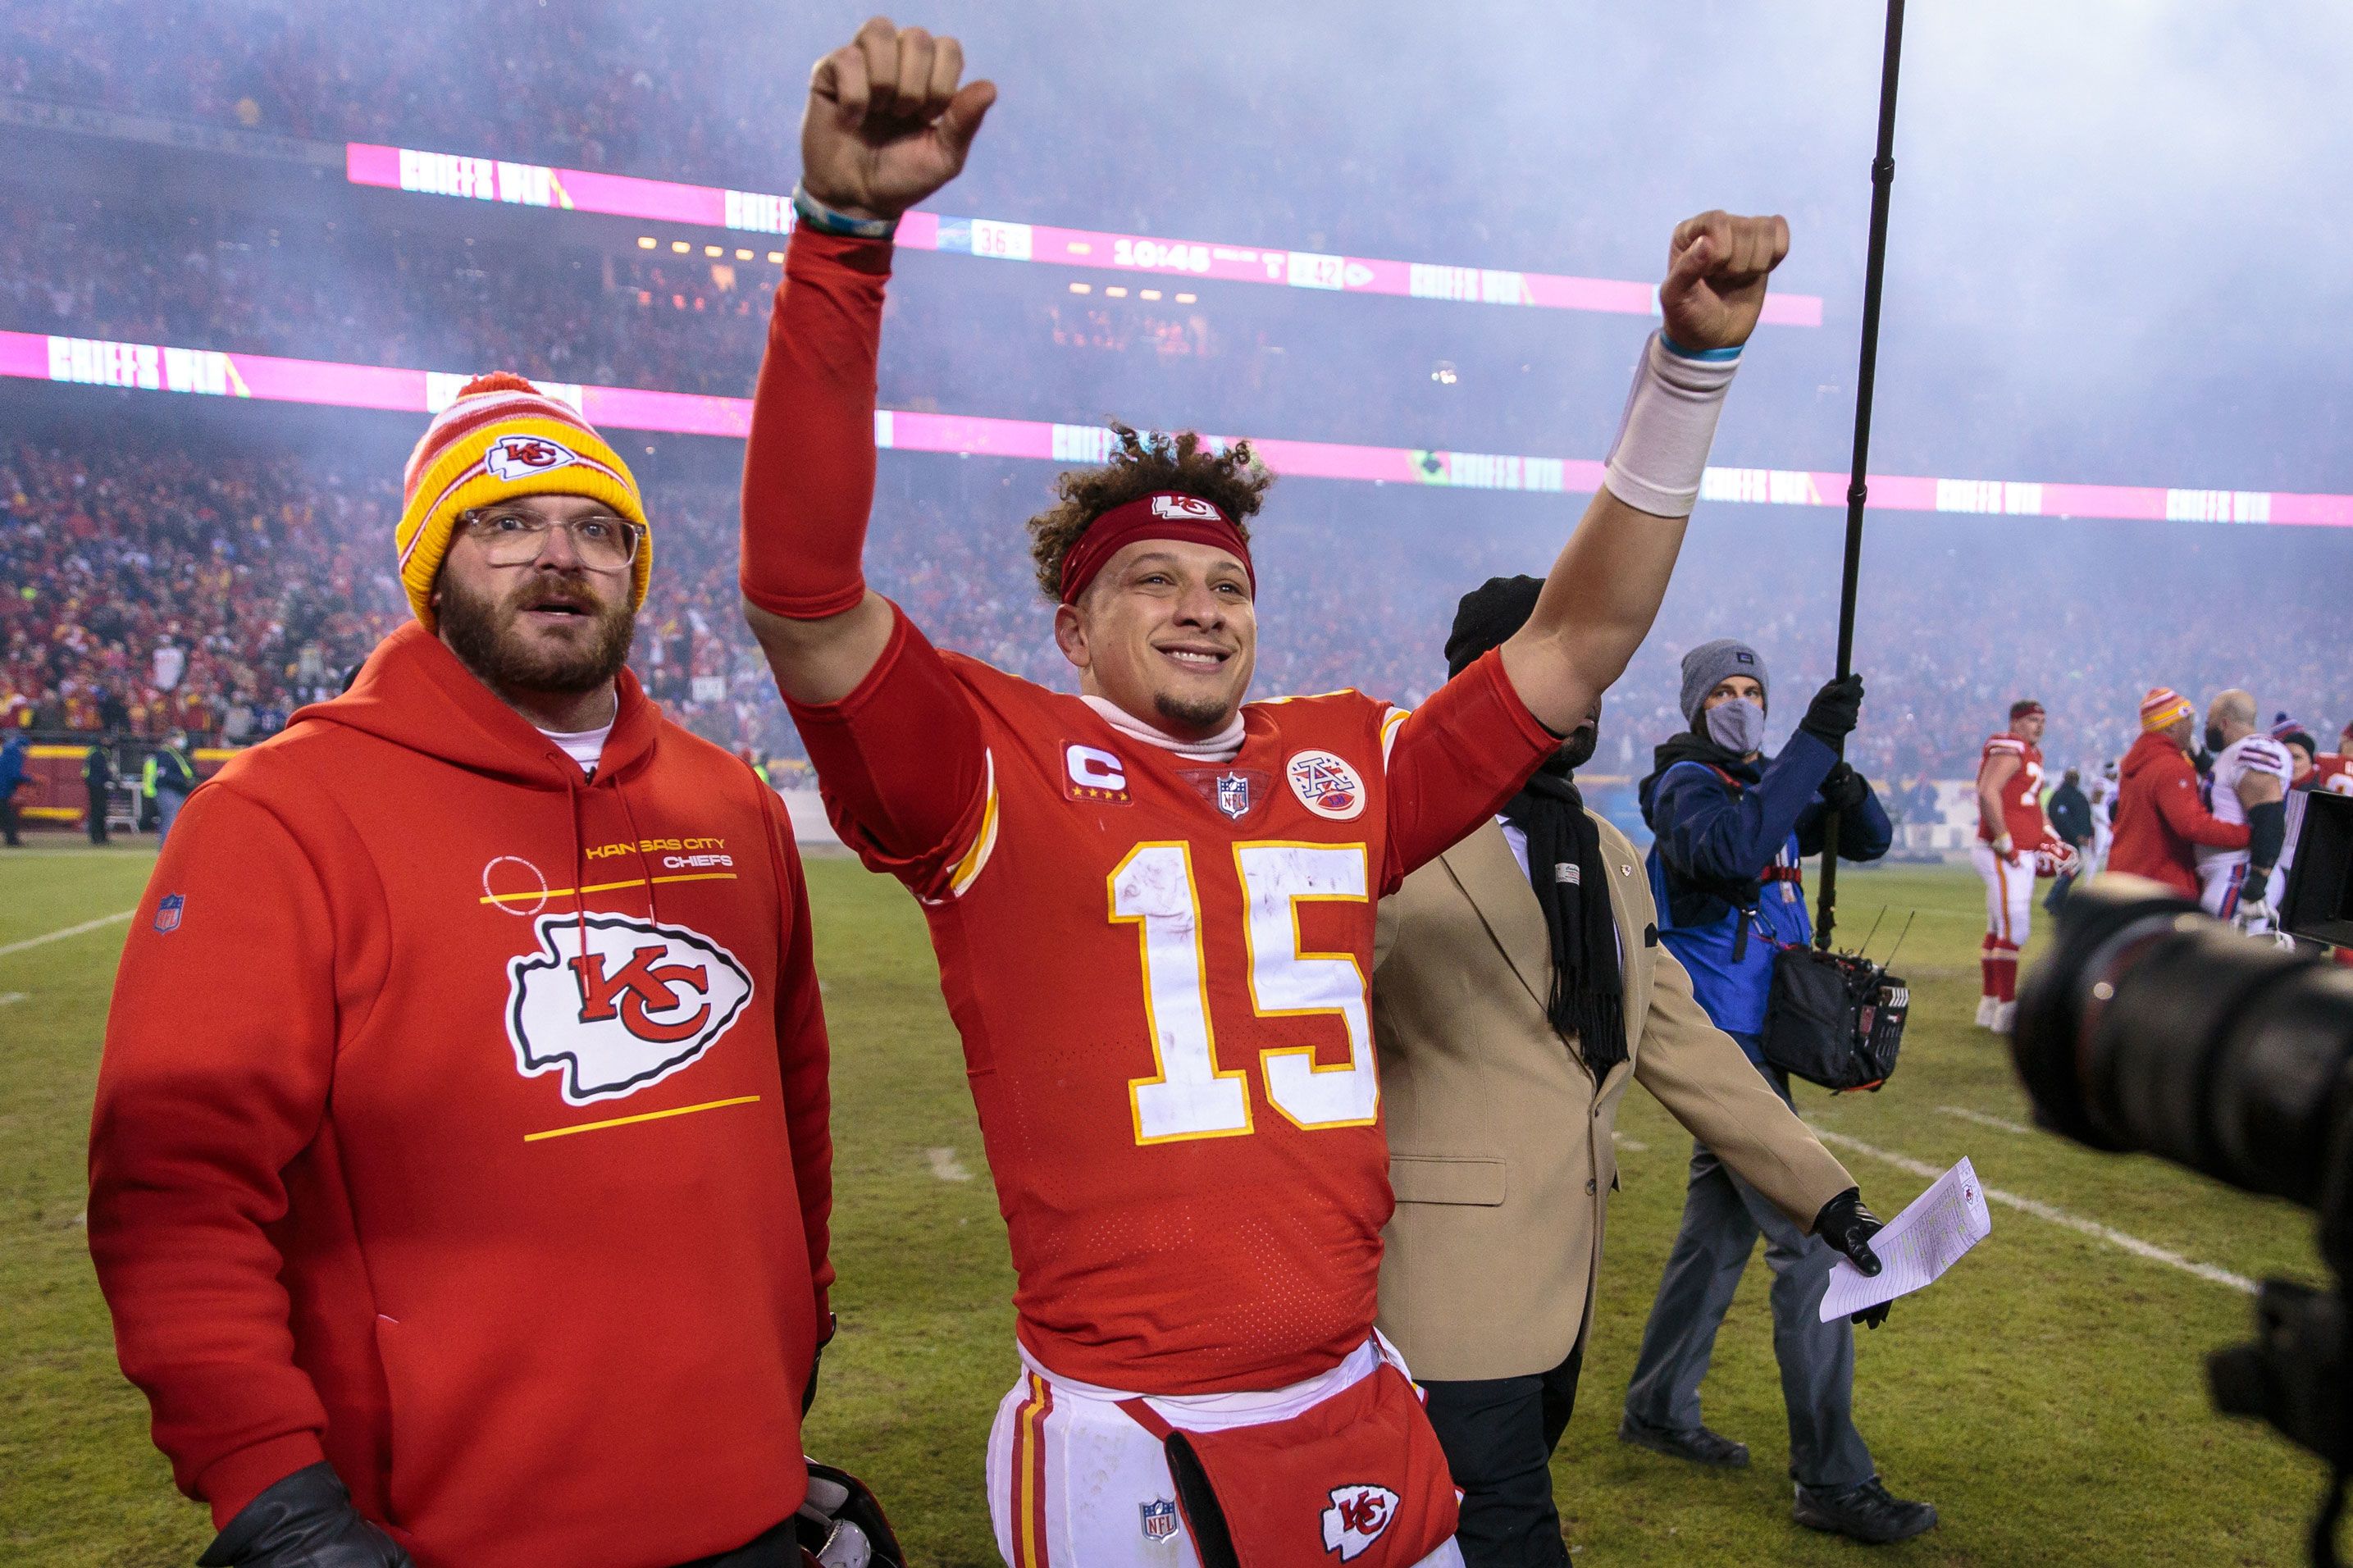 Patrick Mahomes and the Kansas City Chiefs are the winners of